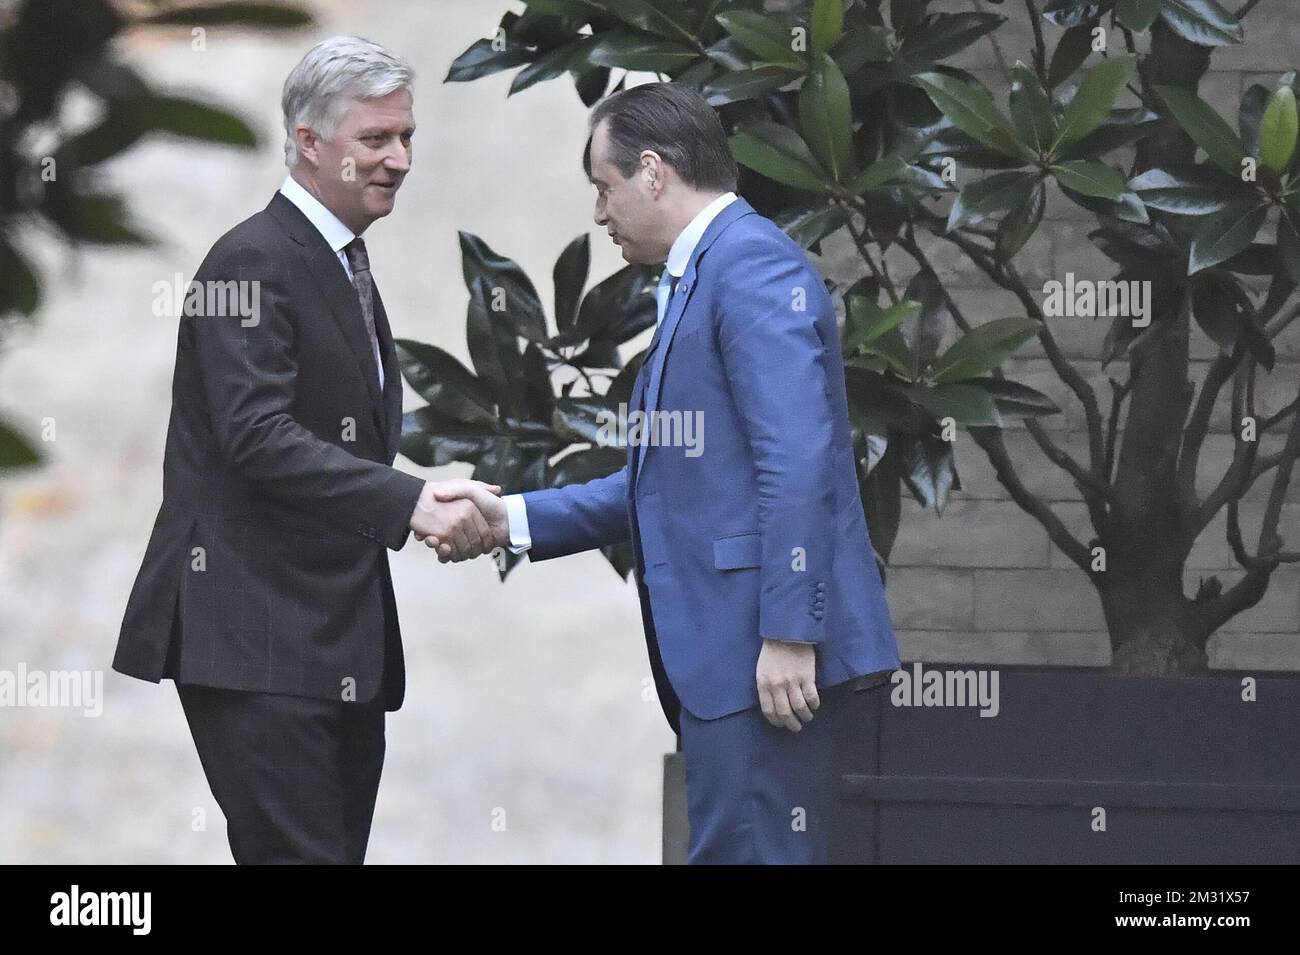 King Philippe - Filip of Belgium welcomes N-VA chairman Bart De Wever for a meeting with the King at the Royal Palace in Brussels, Tuesday 10 December 2019, regarding the formation of a new government after 26 May's regional, federal and European elections. Informator Magnette made his third report yesterday and asked to be discharged as informer. King started new consultations with parties chairmen. BELGA PHOTO DIRK WAEM  Stock Photo